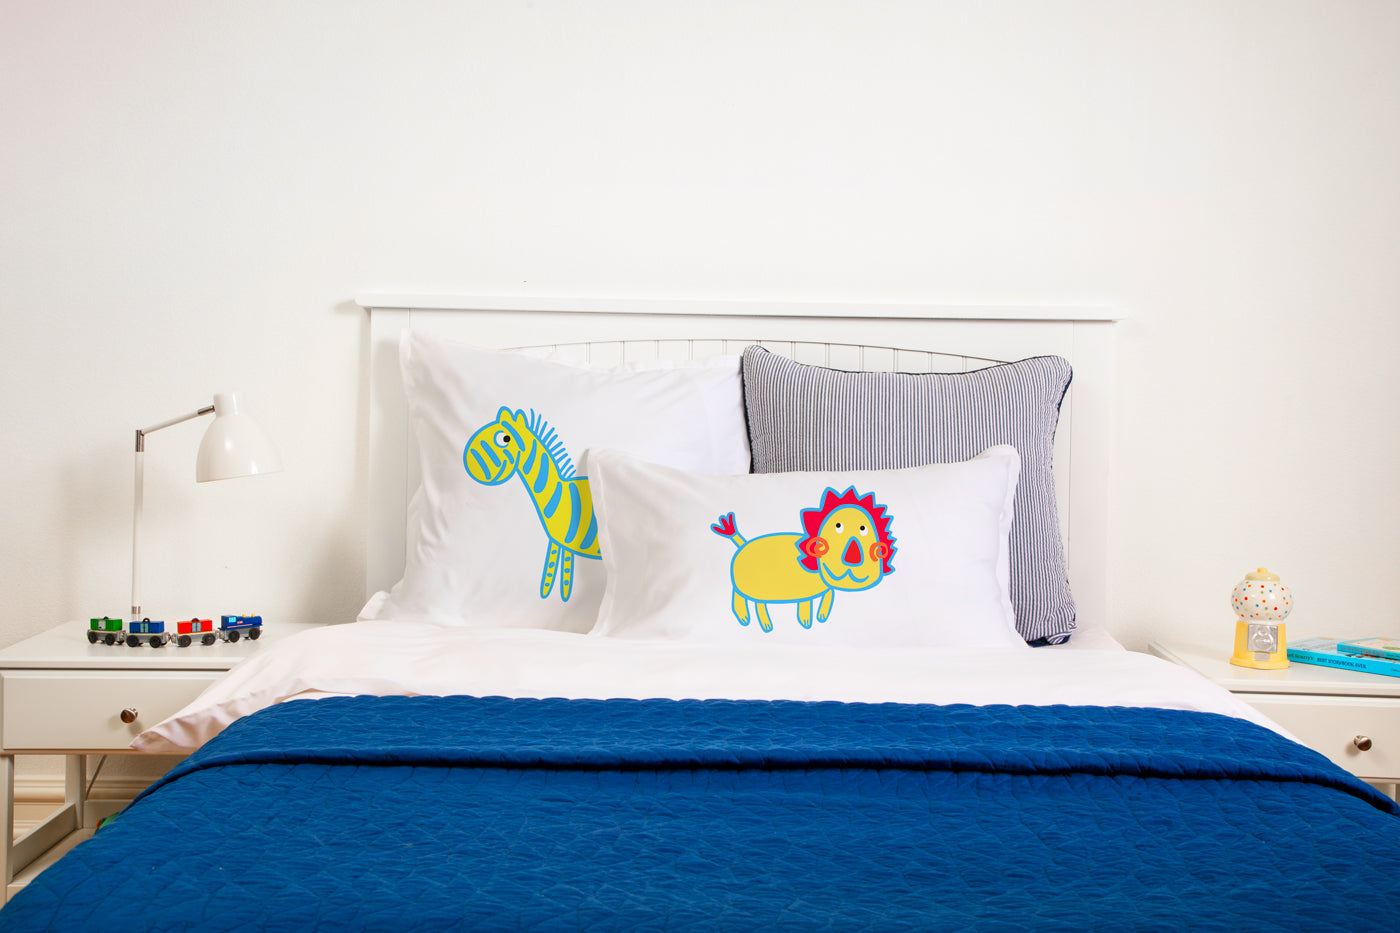 Gold Lion - Personalized Kids Pillowcase Collection